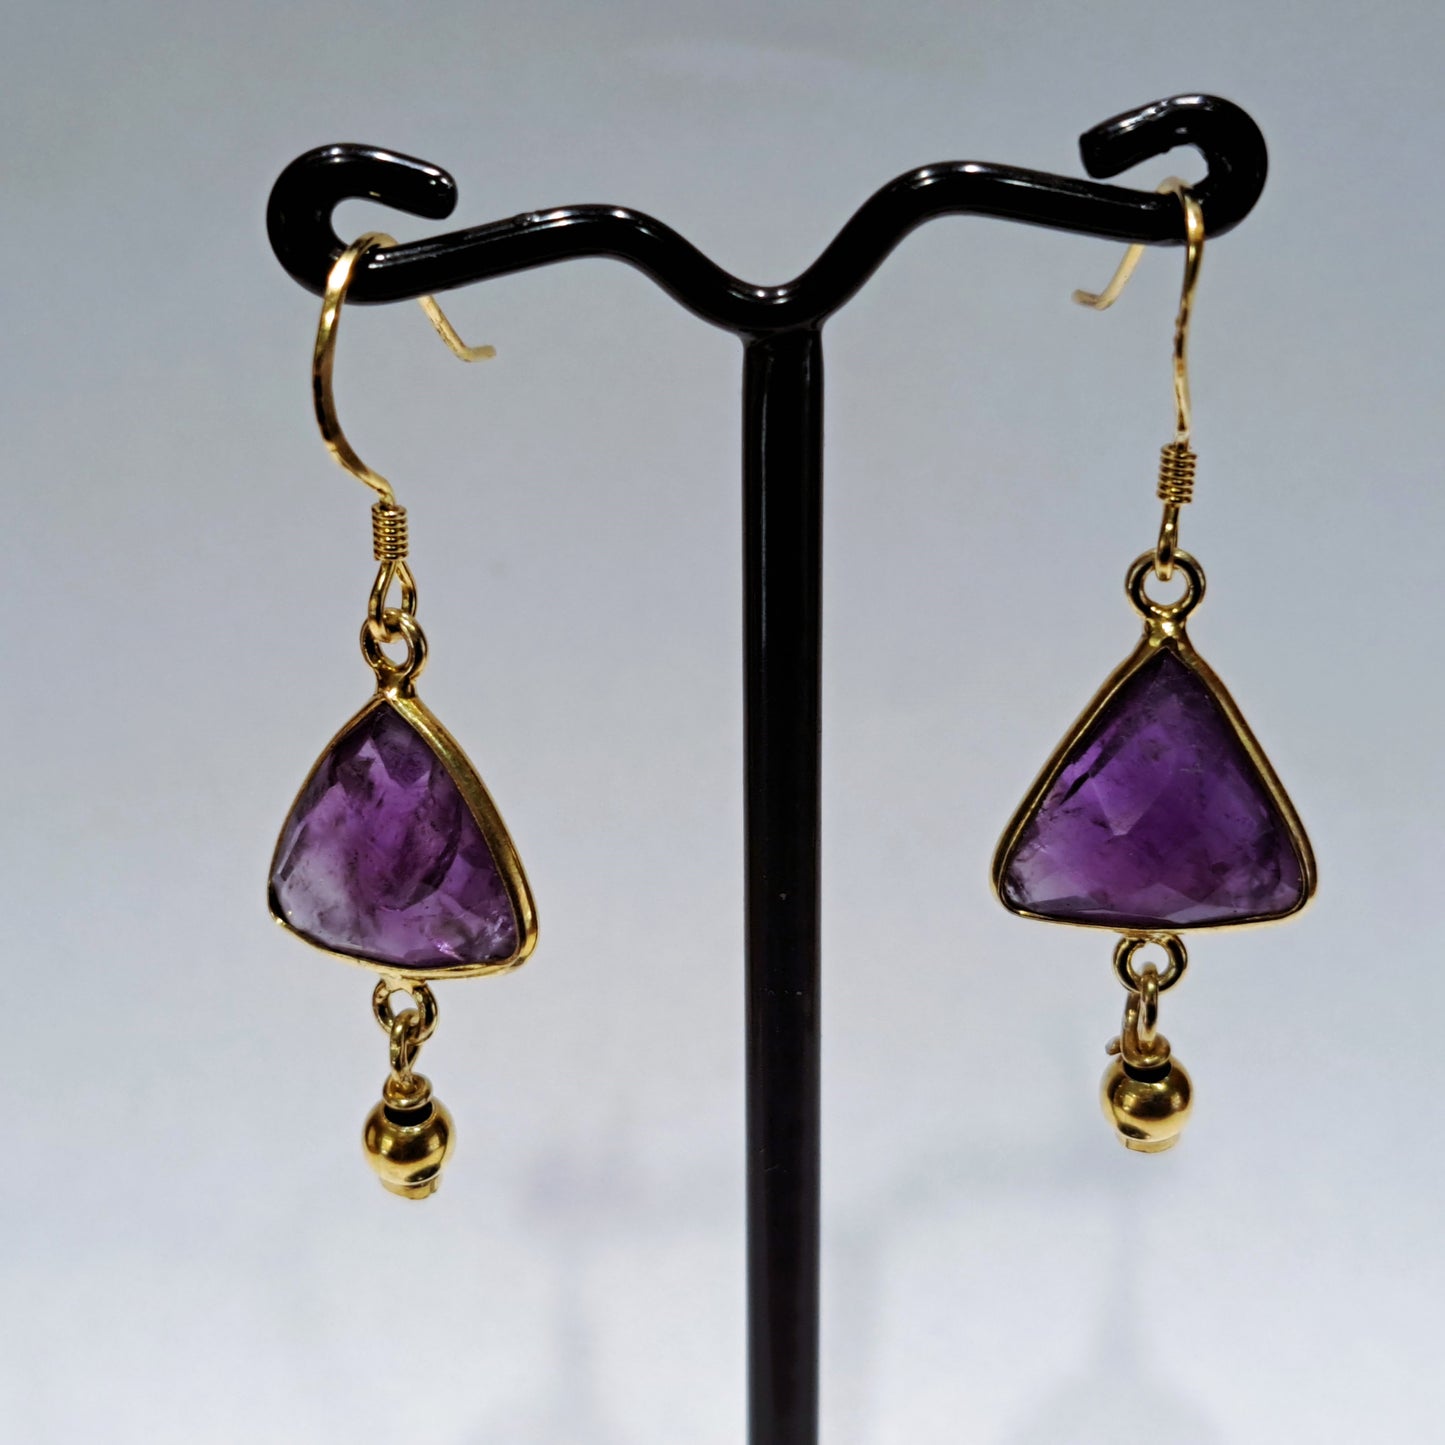 Handmade gold plated sterling silver earrings with trigonal amethysts